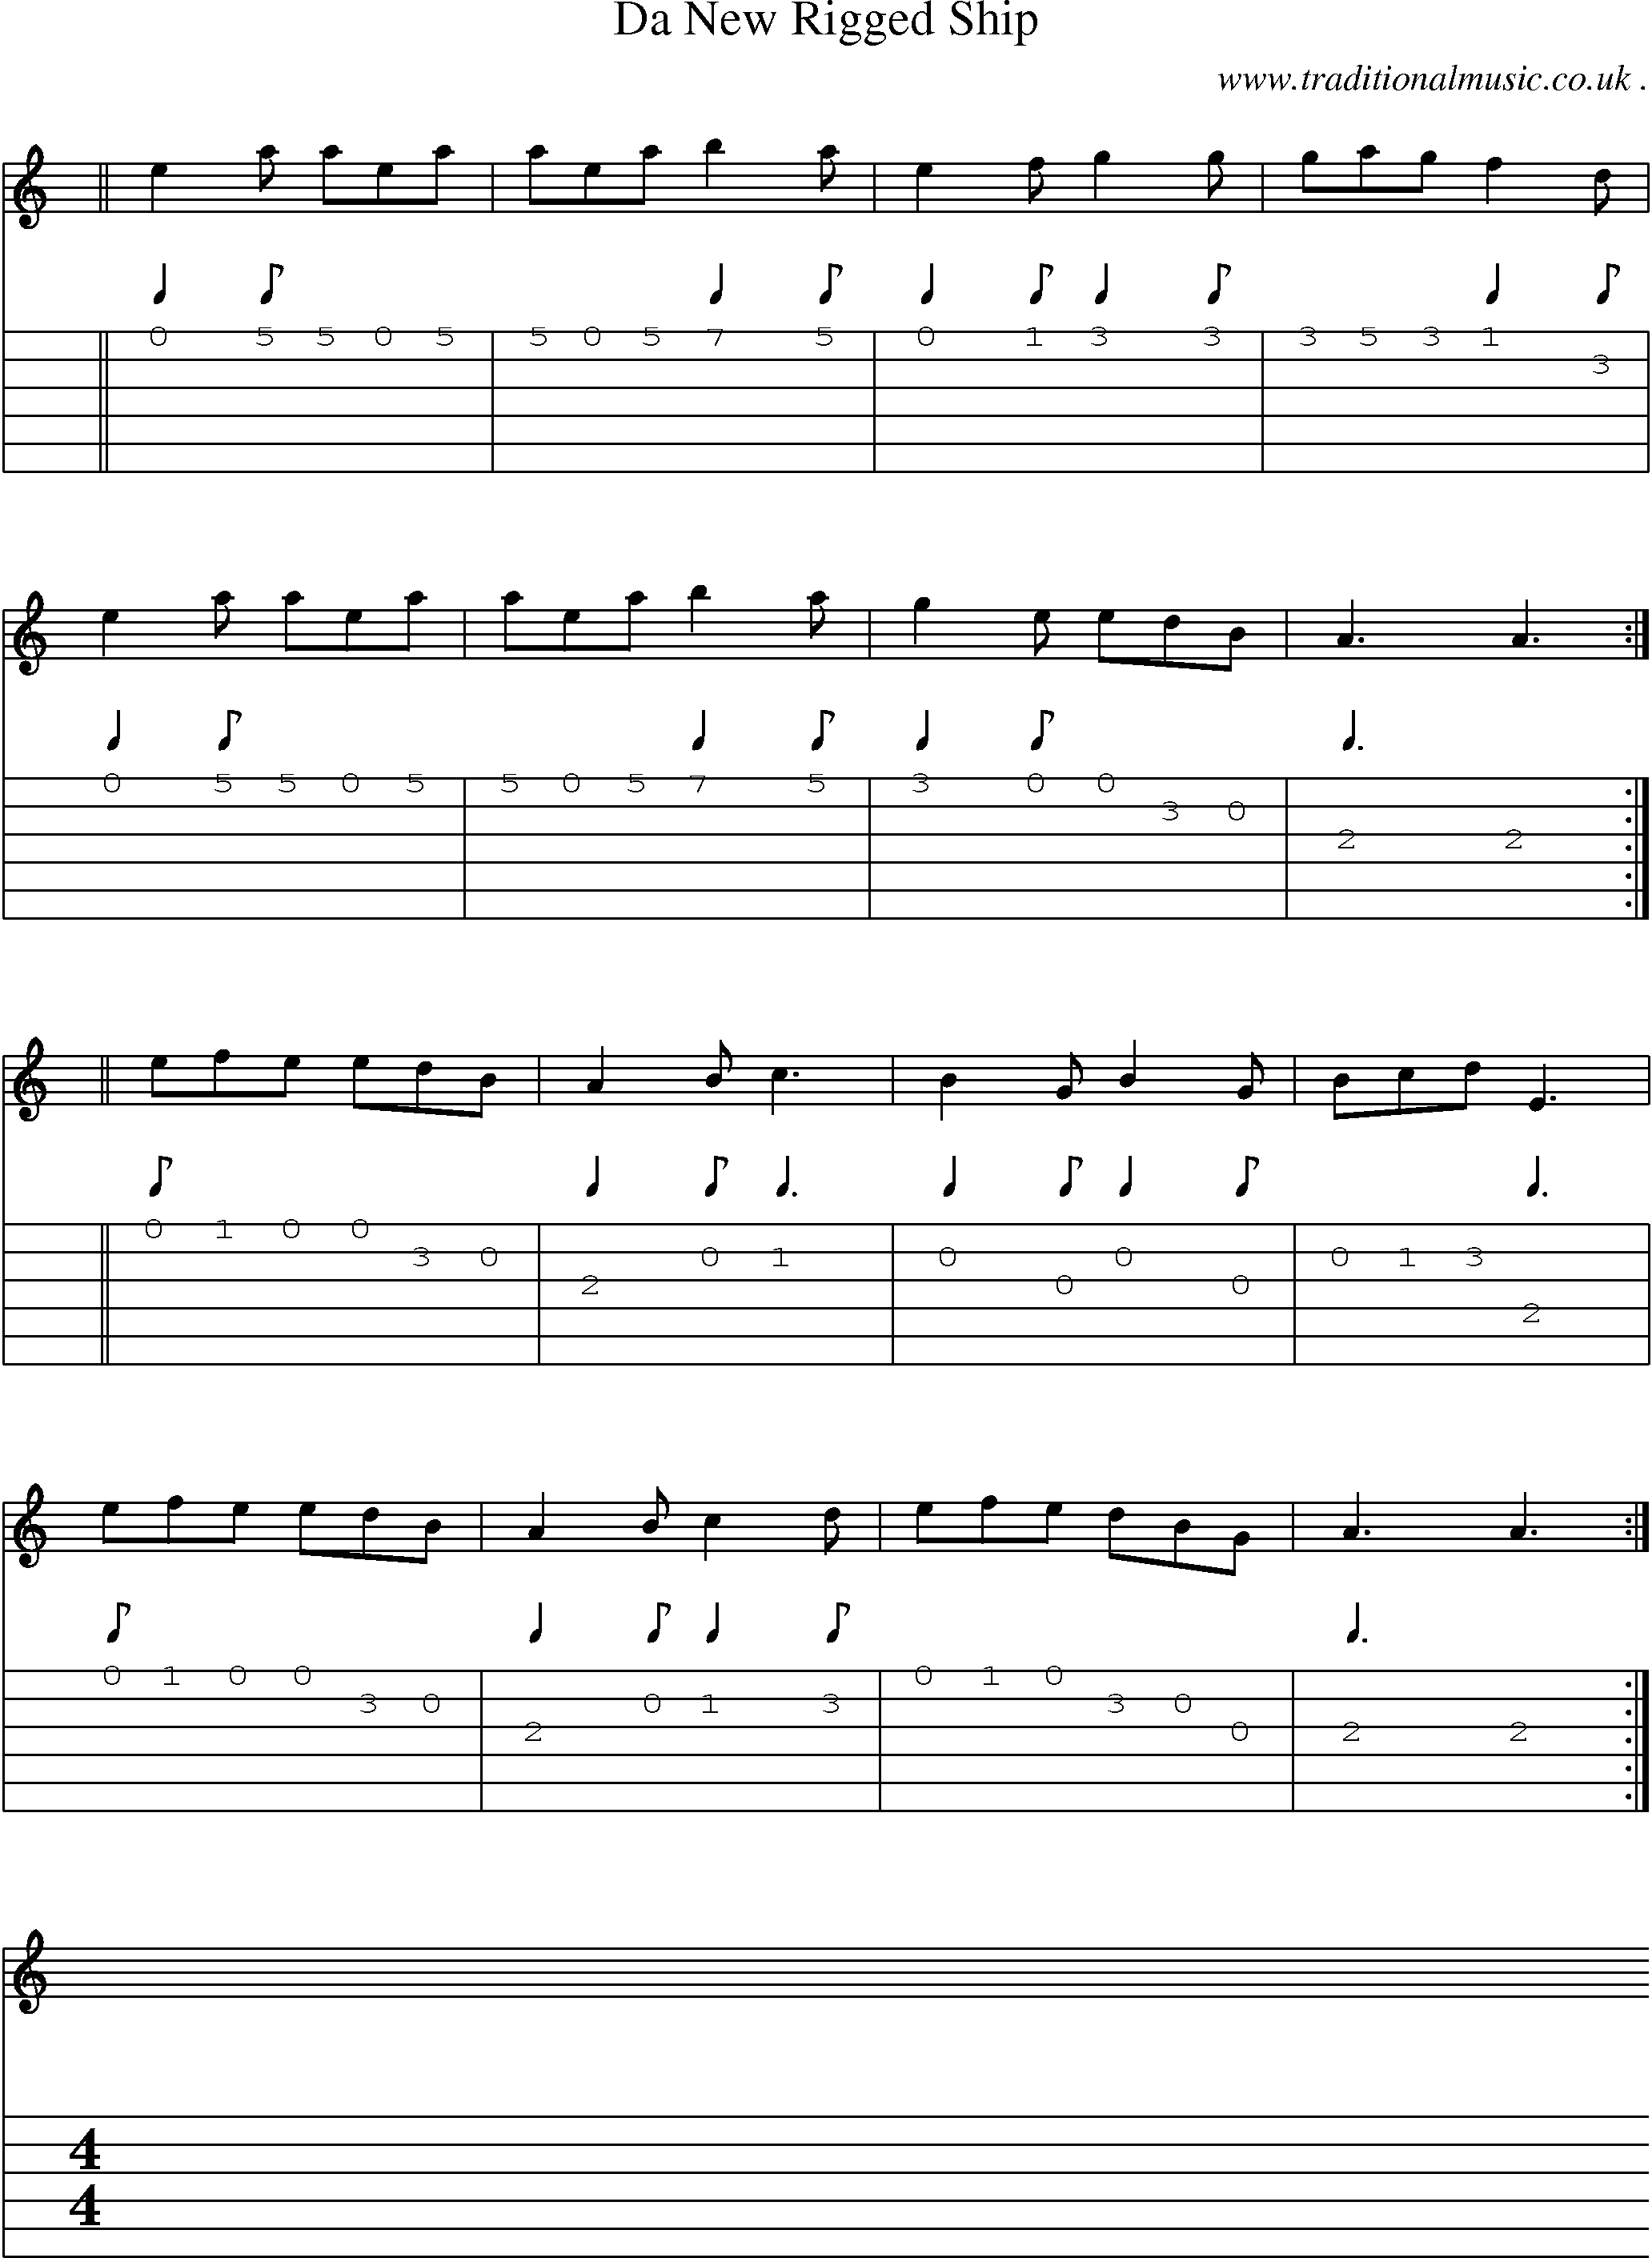 Sheet-Music and Guitar Tabs for Da New Rigged Ship